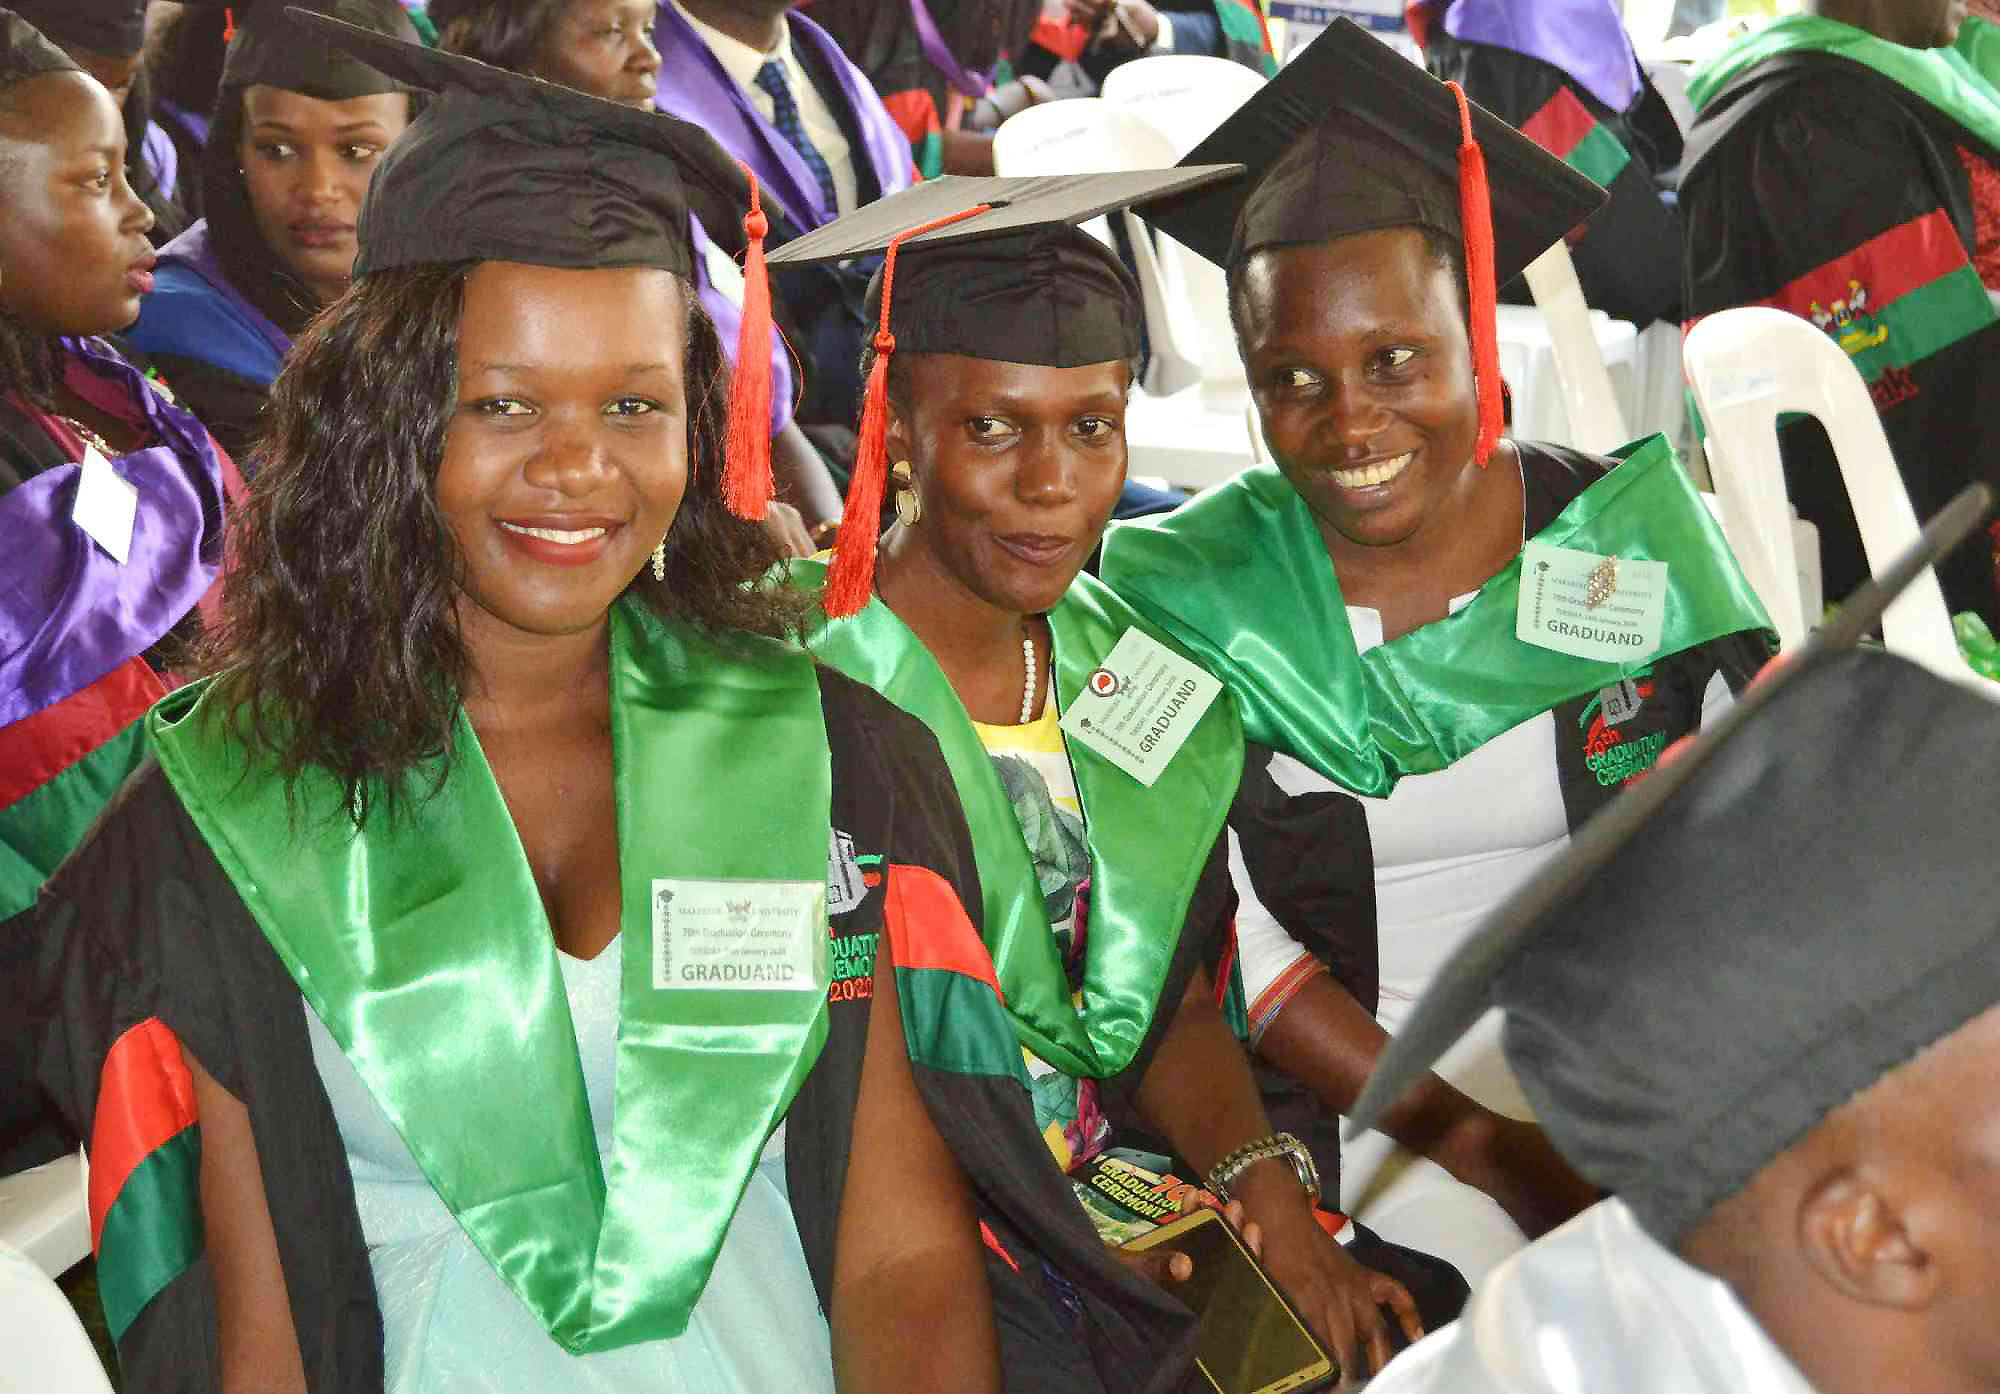 Some of the Female Masters Graduands from the College of Agricultural and Environmental Sciences (CAES) smile for the camera during Day 1 of the 70th Graduation Ceremony on 14th January 2020, Freedom Square, Makerere University.